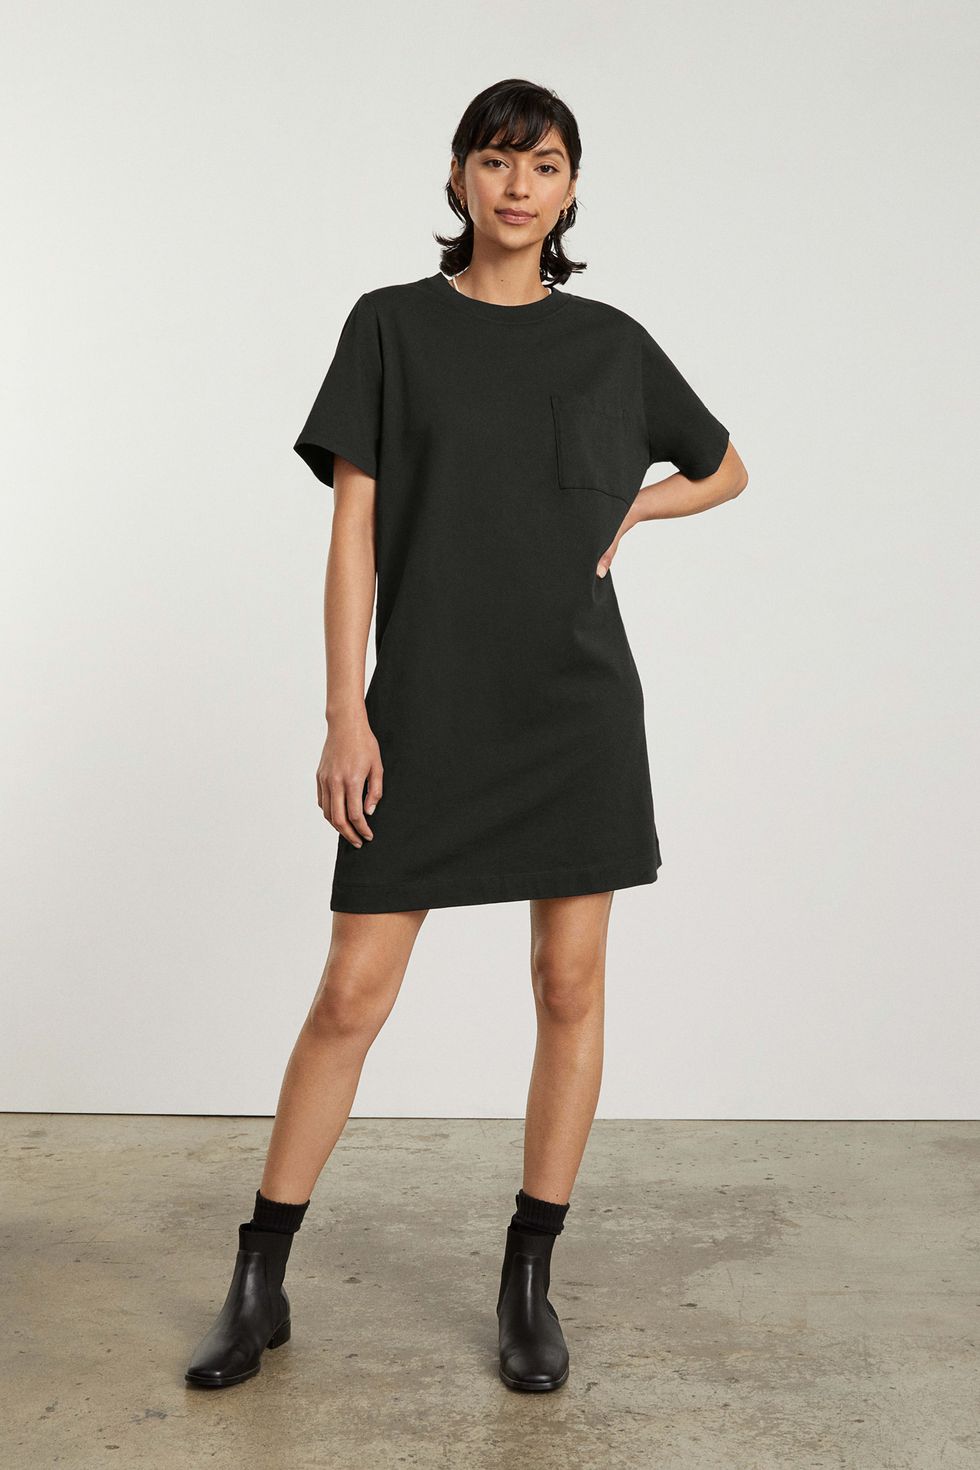 The 10 Best T-Shirt Dresses of 2023 - Most Comfortable Styles, Rank &  Style